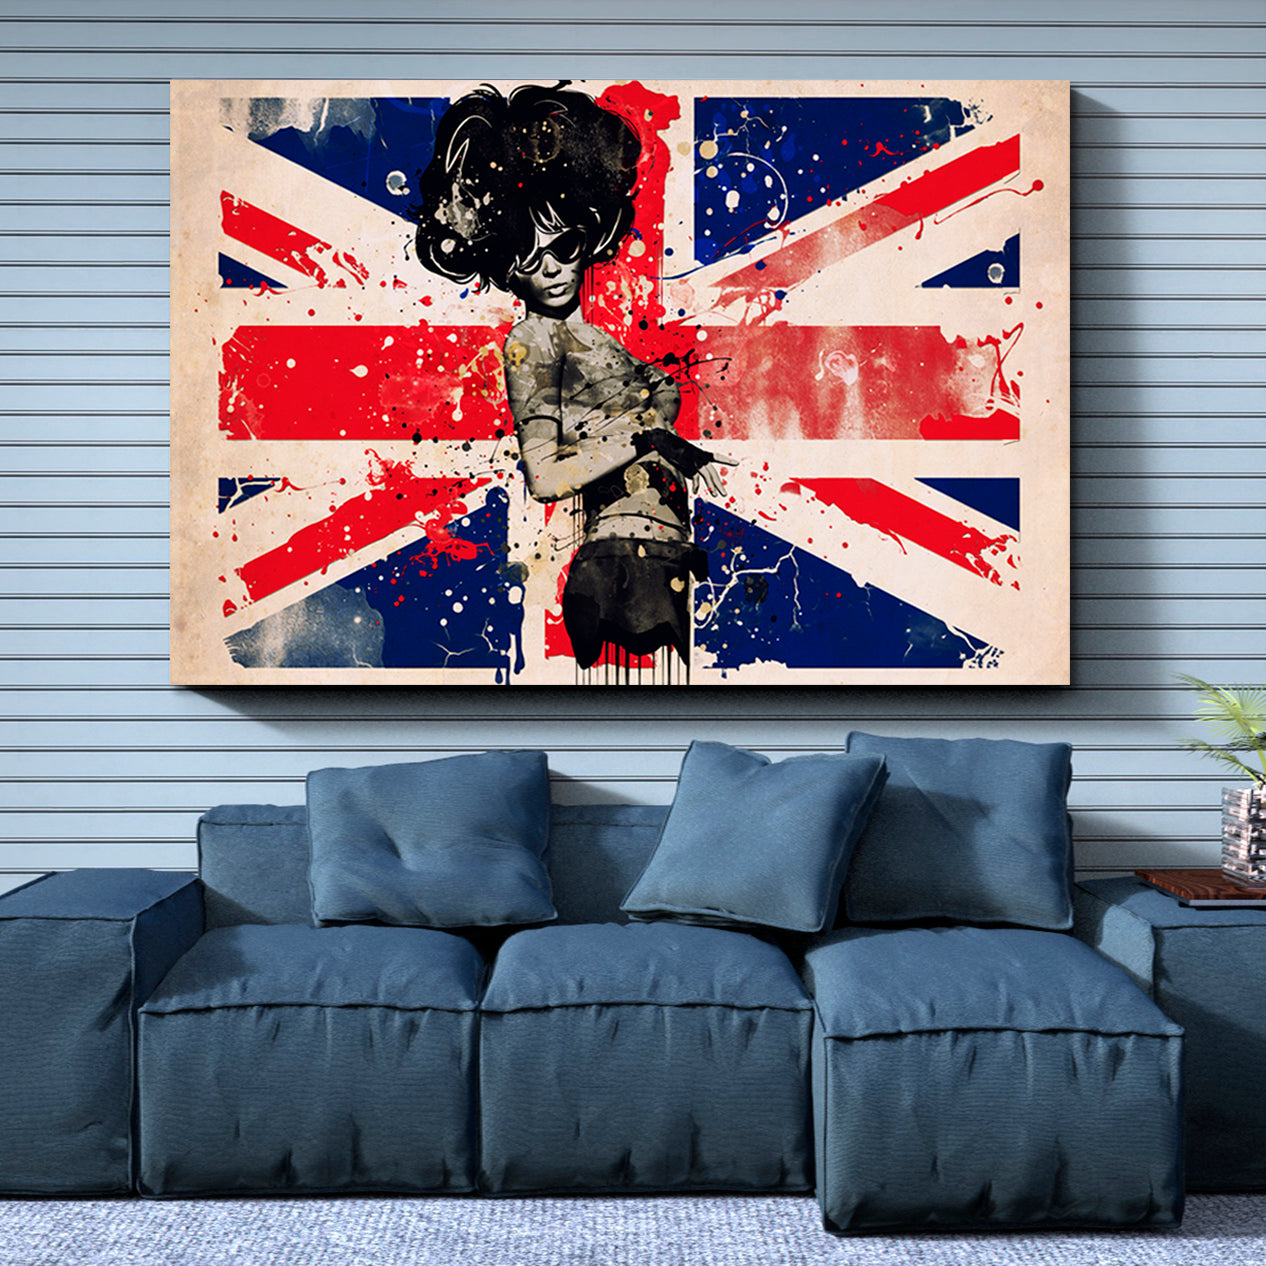 Fashion Woman British Flag Modern Grunge Style Posters, Flags Giclee Print Artesty 1 panel 24" x 16" 